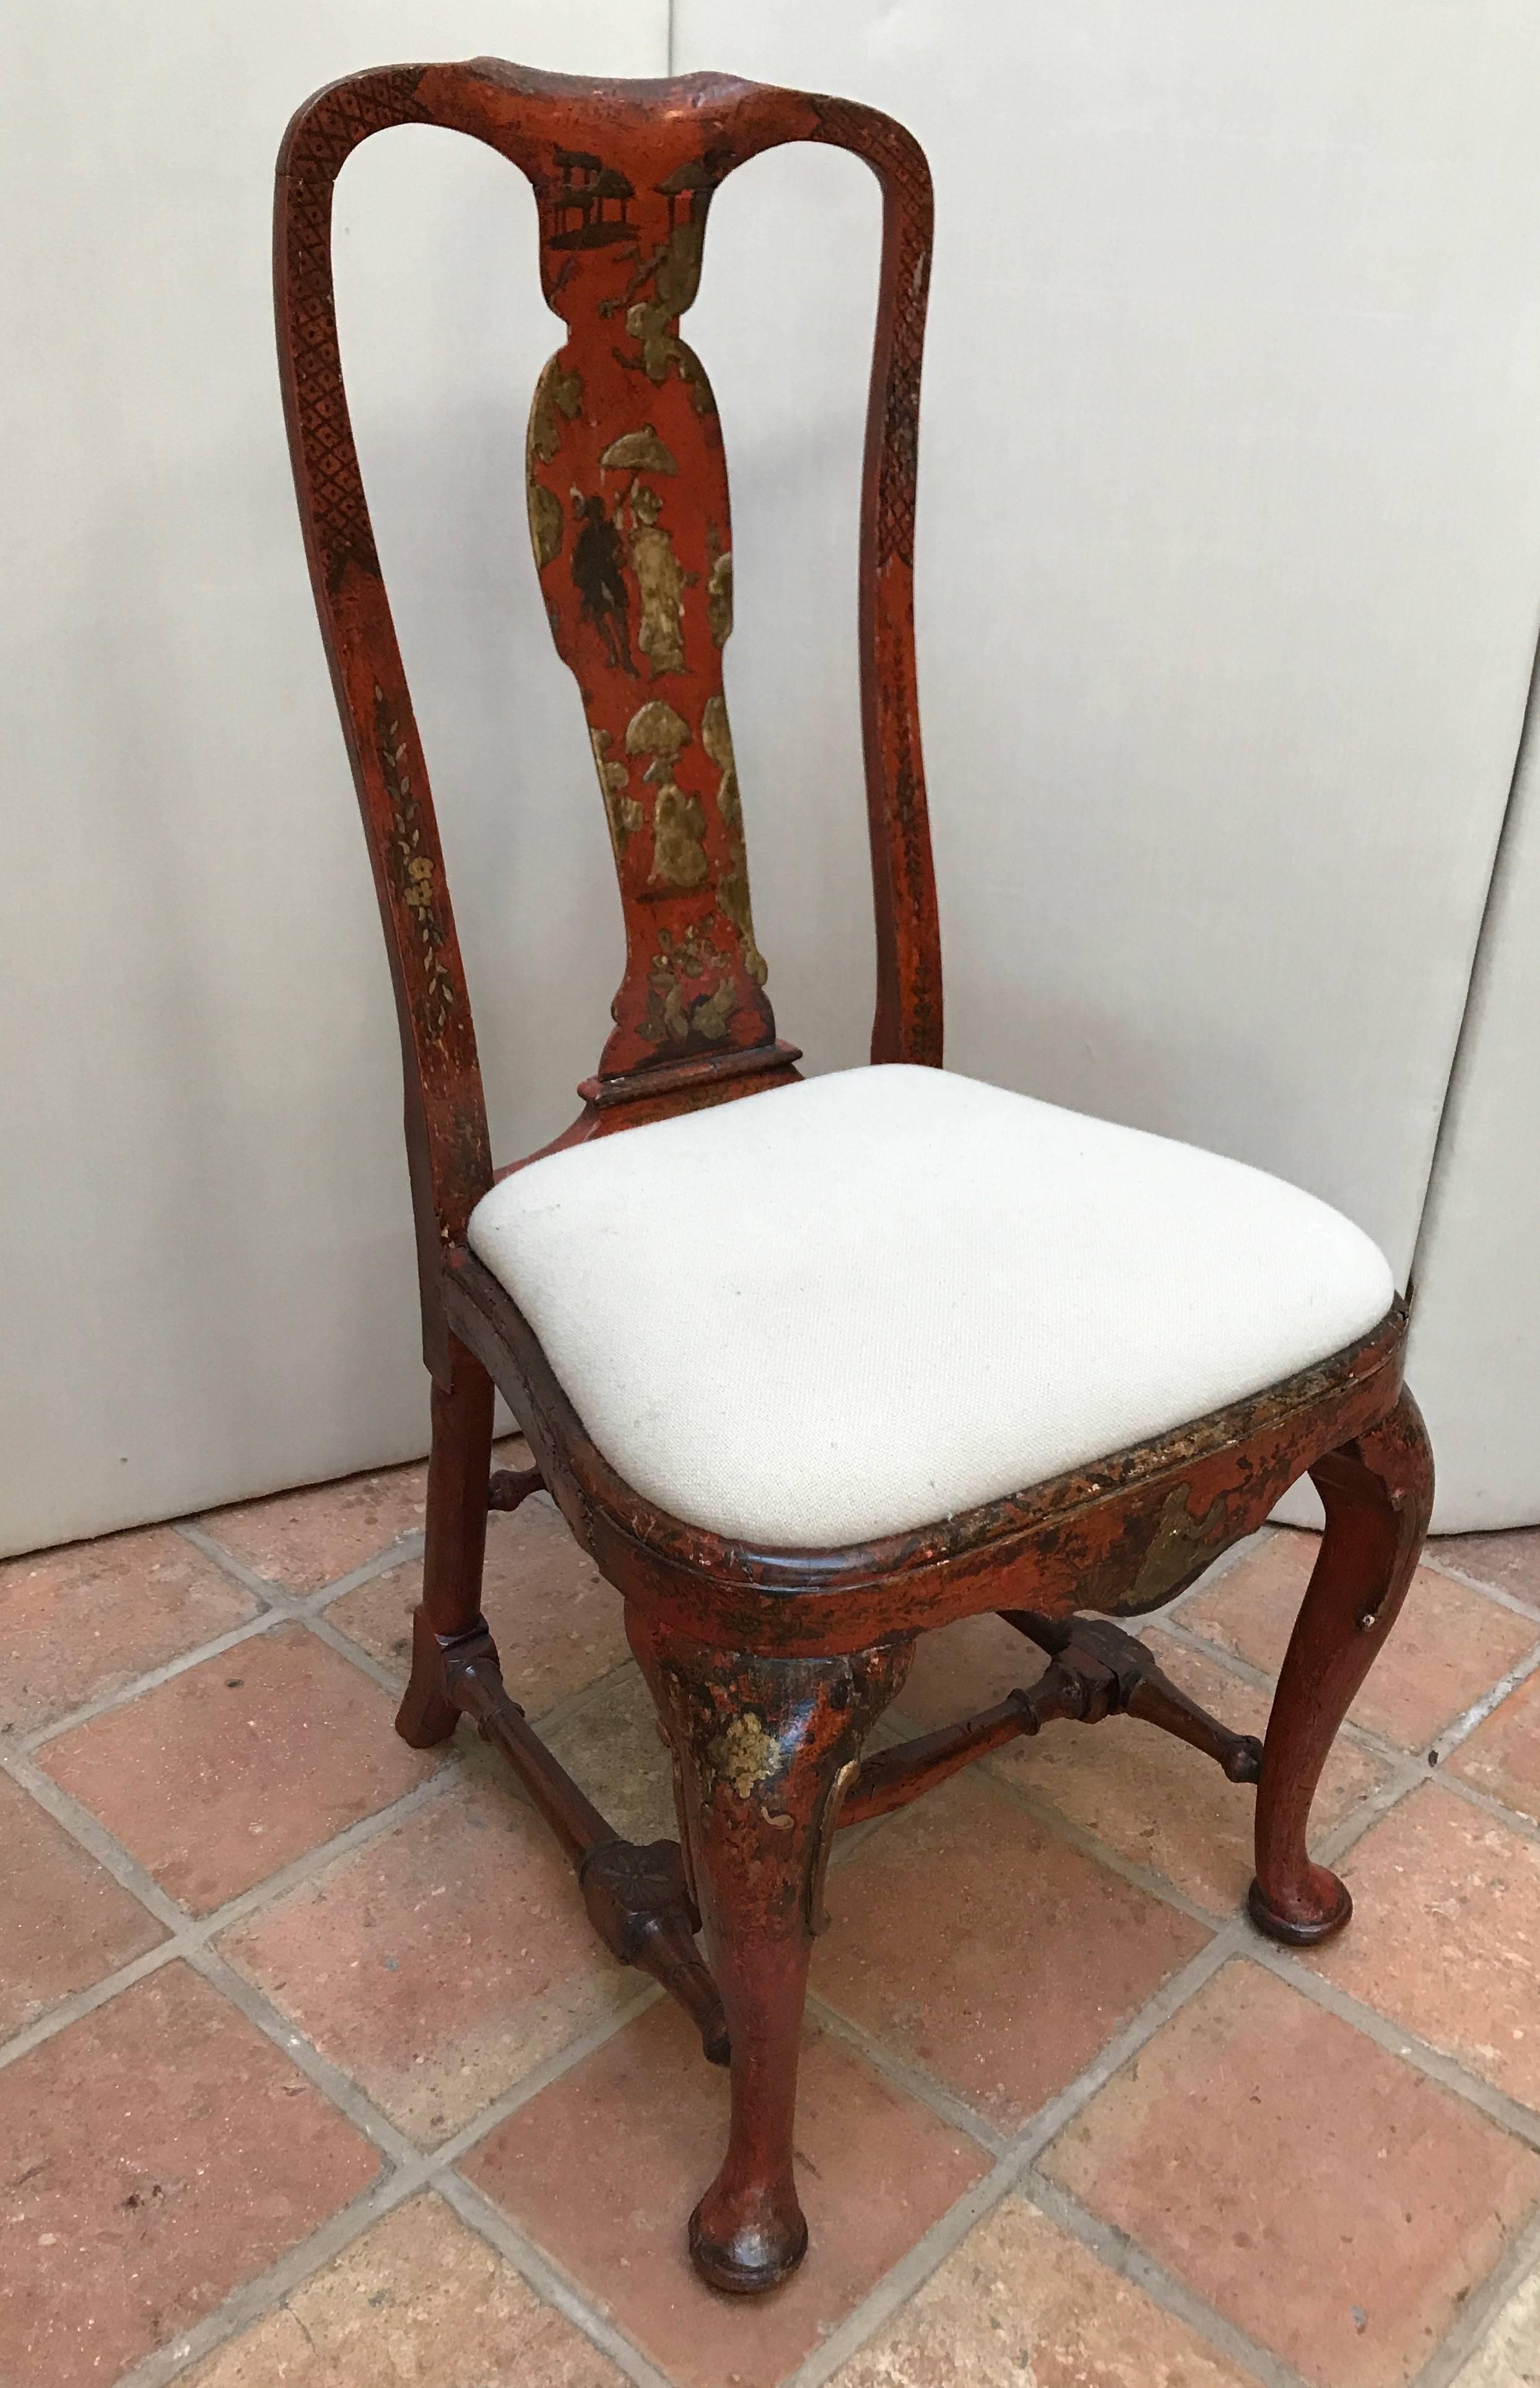 Hand-Crafted 18th Century Queen Anne Period Red Lacquer and Gold Gilt Side Chair